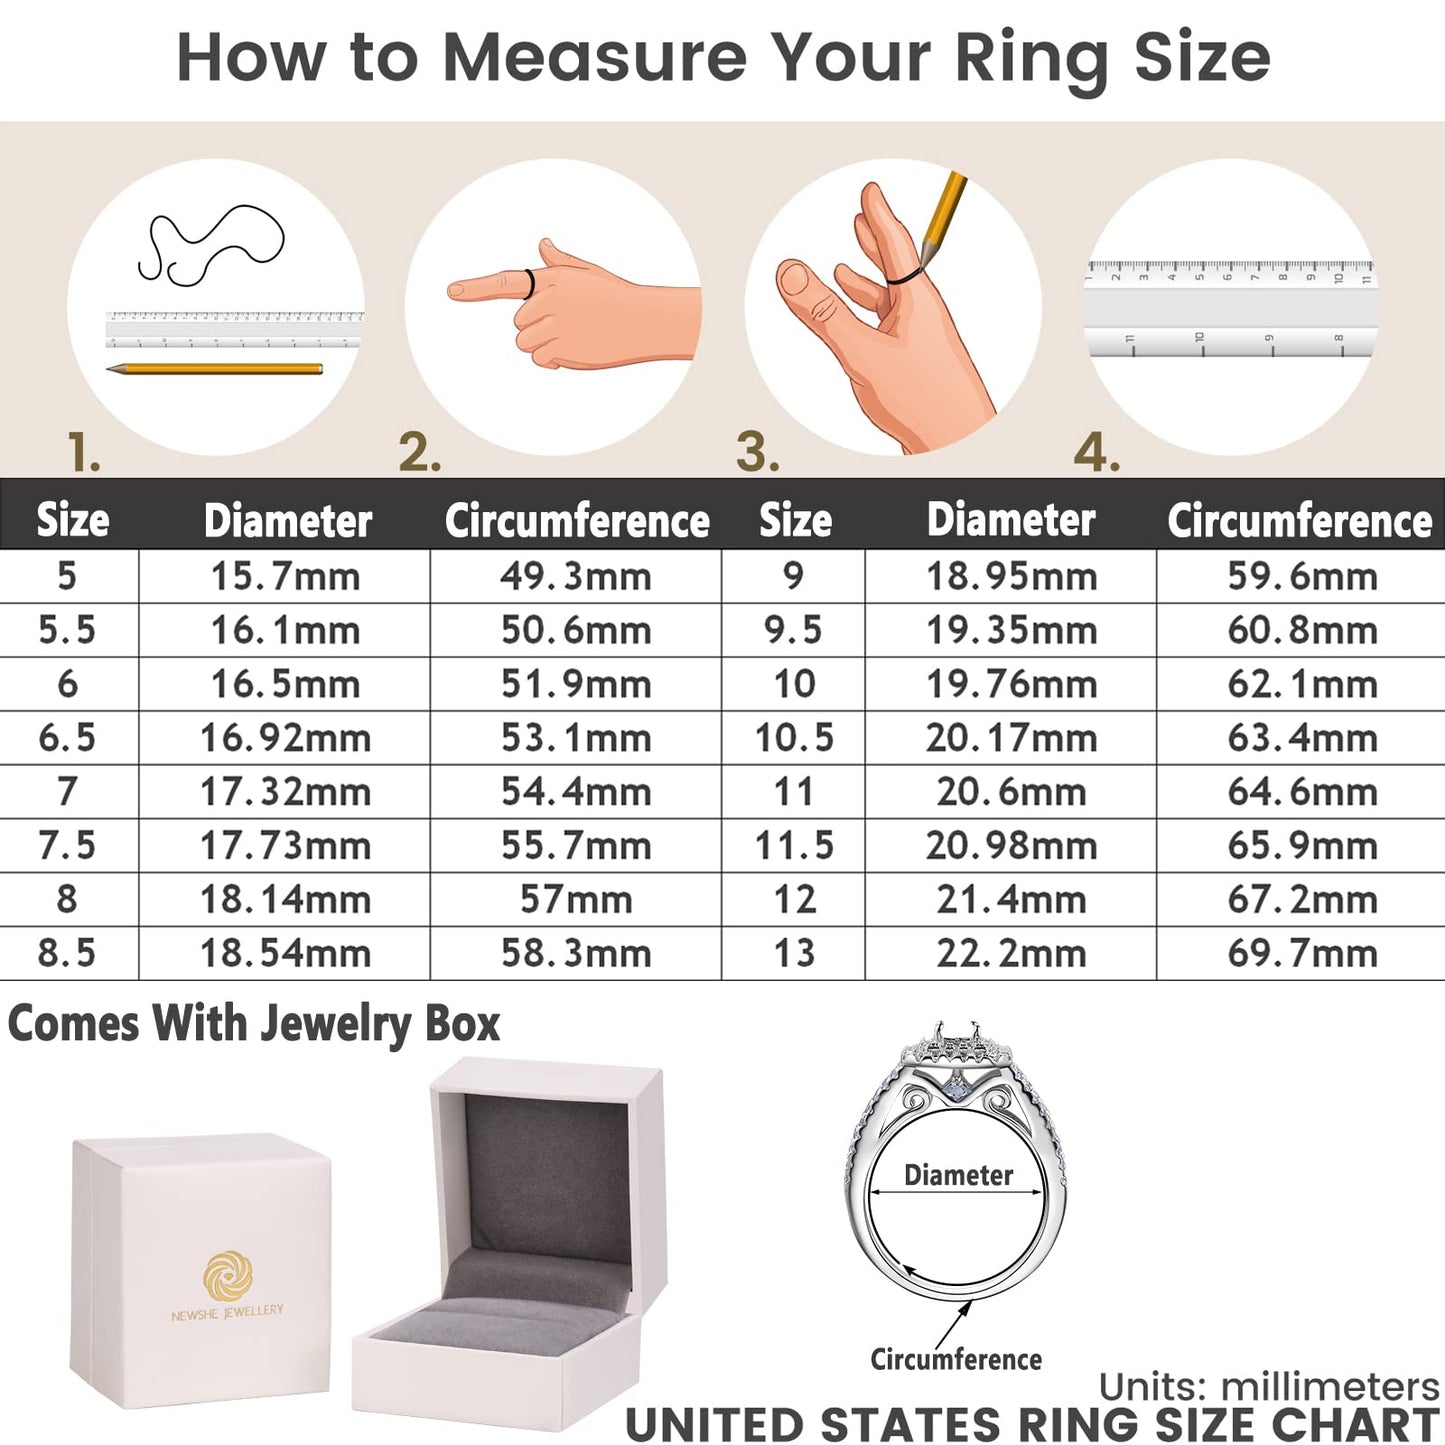 Newshe Jewellery 3.5Ct Wedding Sets for Women AAAAA Cz 925 Sterling Silver Engagement Rings Bridal Band Size 5-10